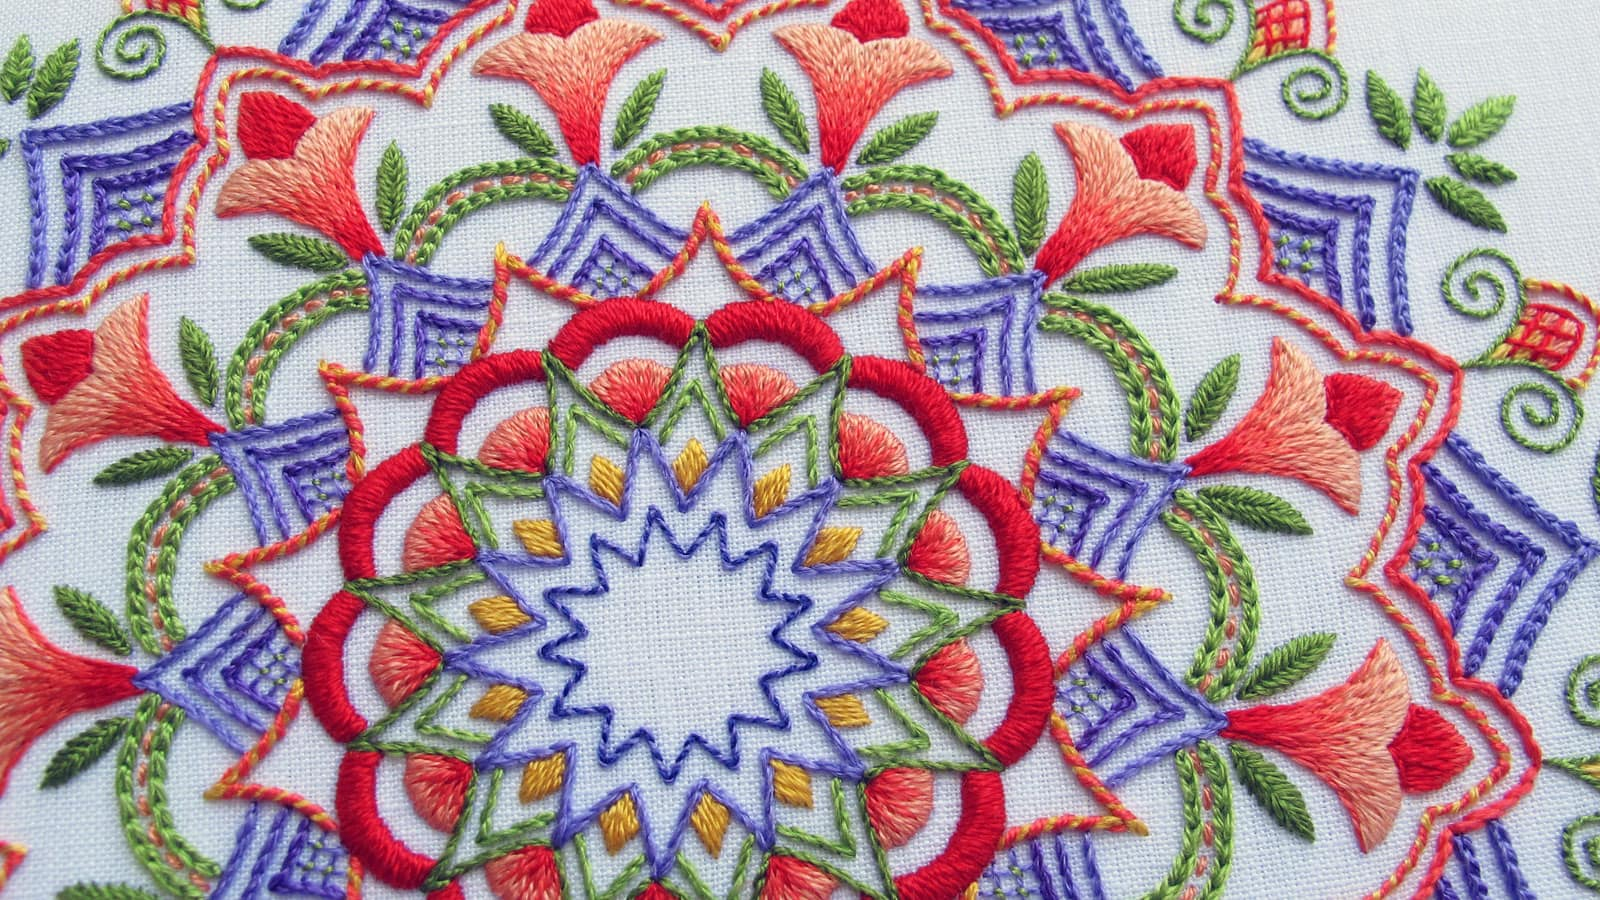 Fun Embroidery Patterns Needlenthread Tips Tricks And Great Resources For Hand Embroidery